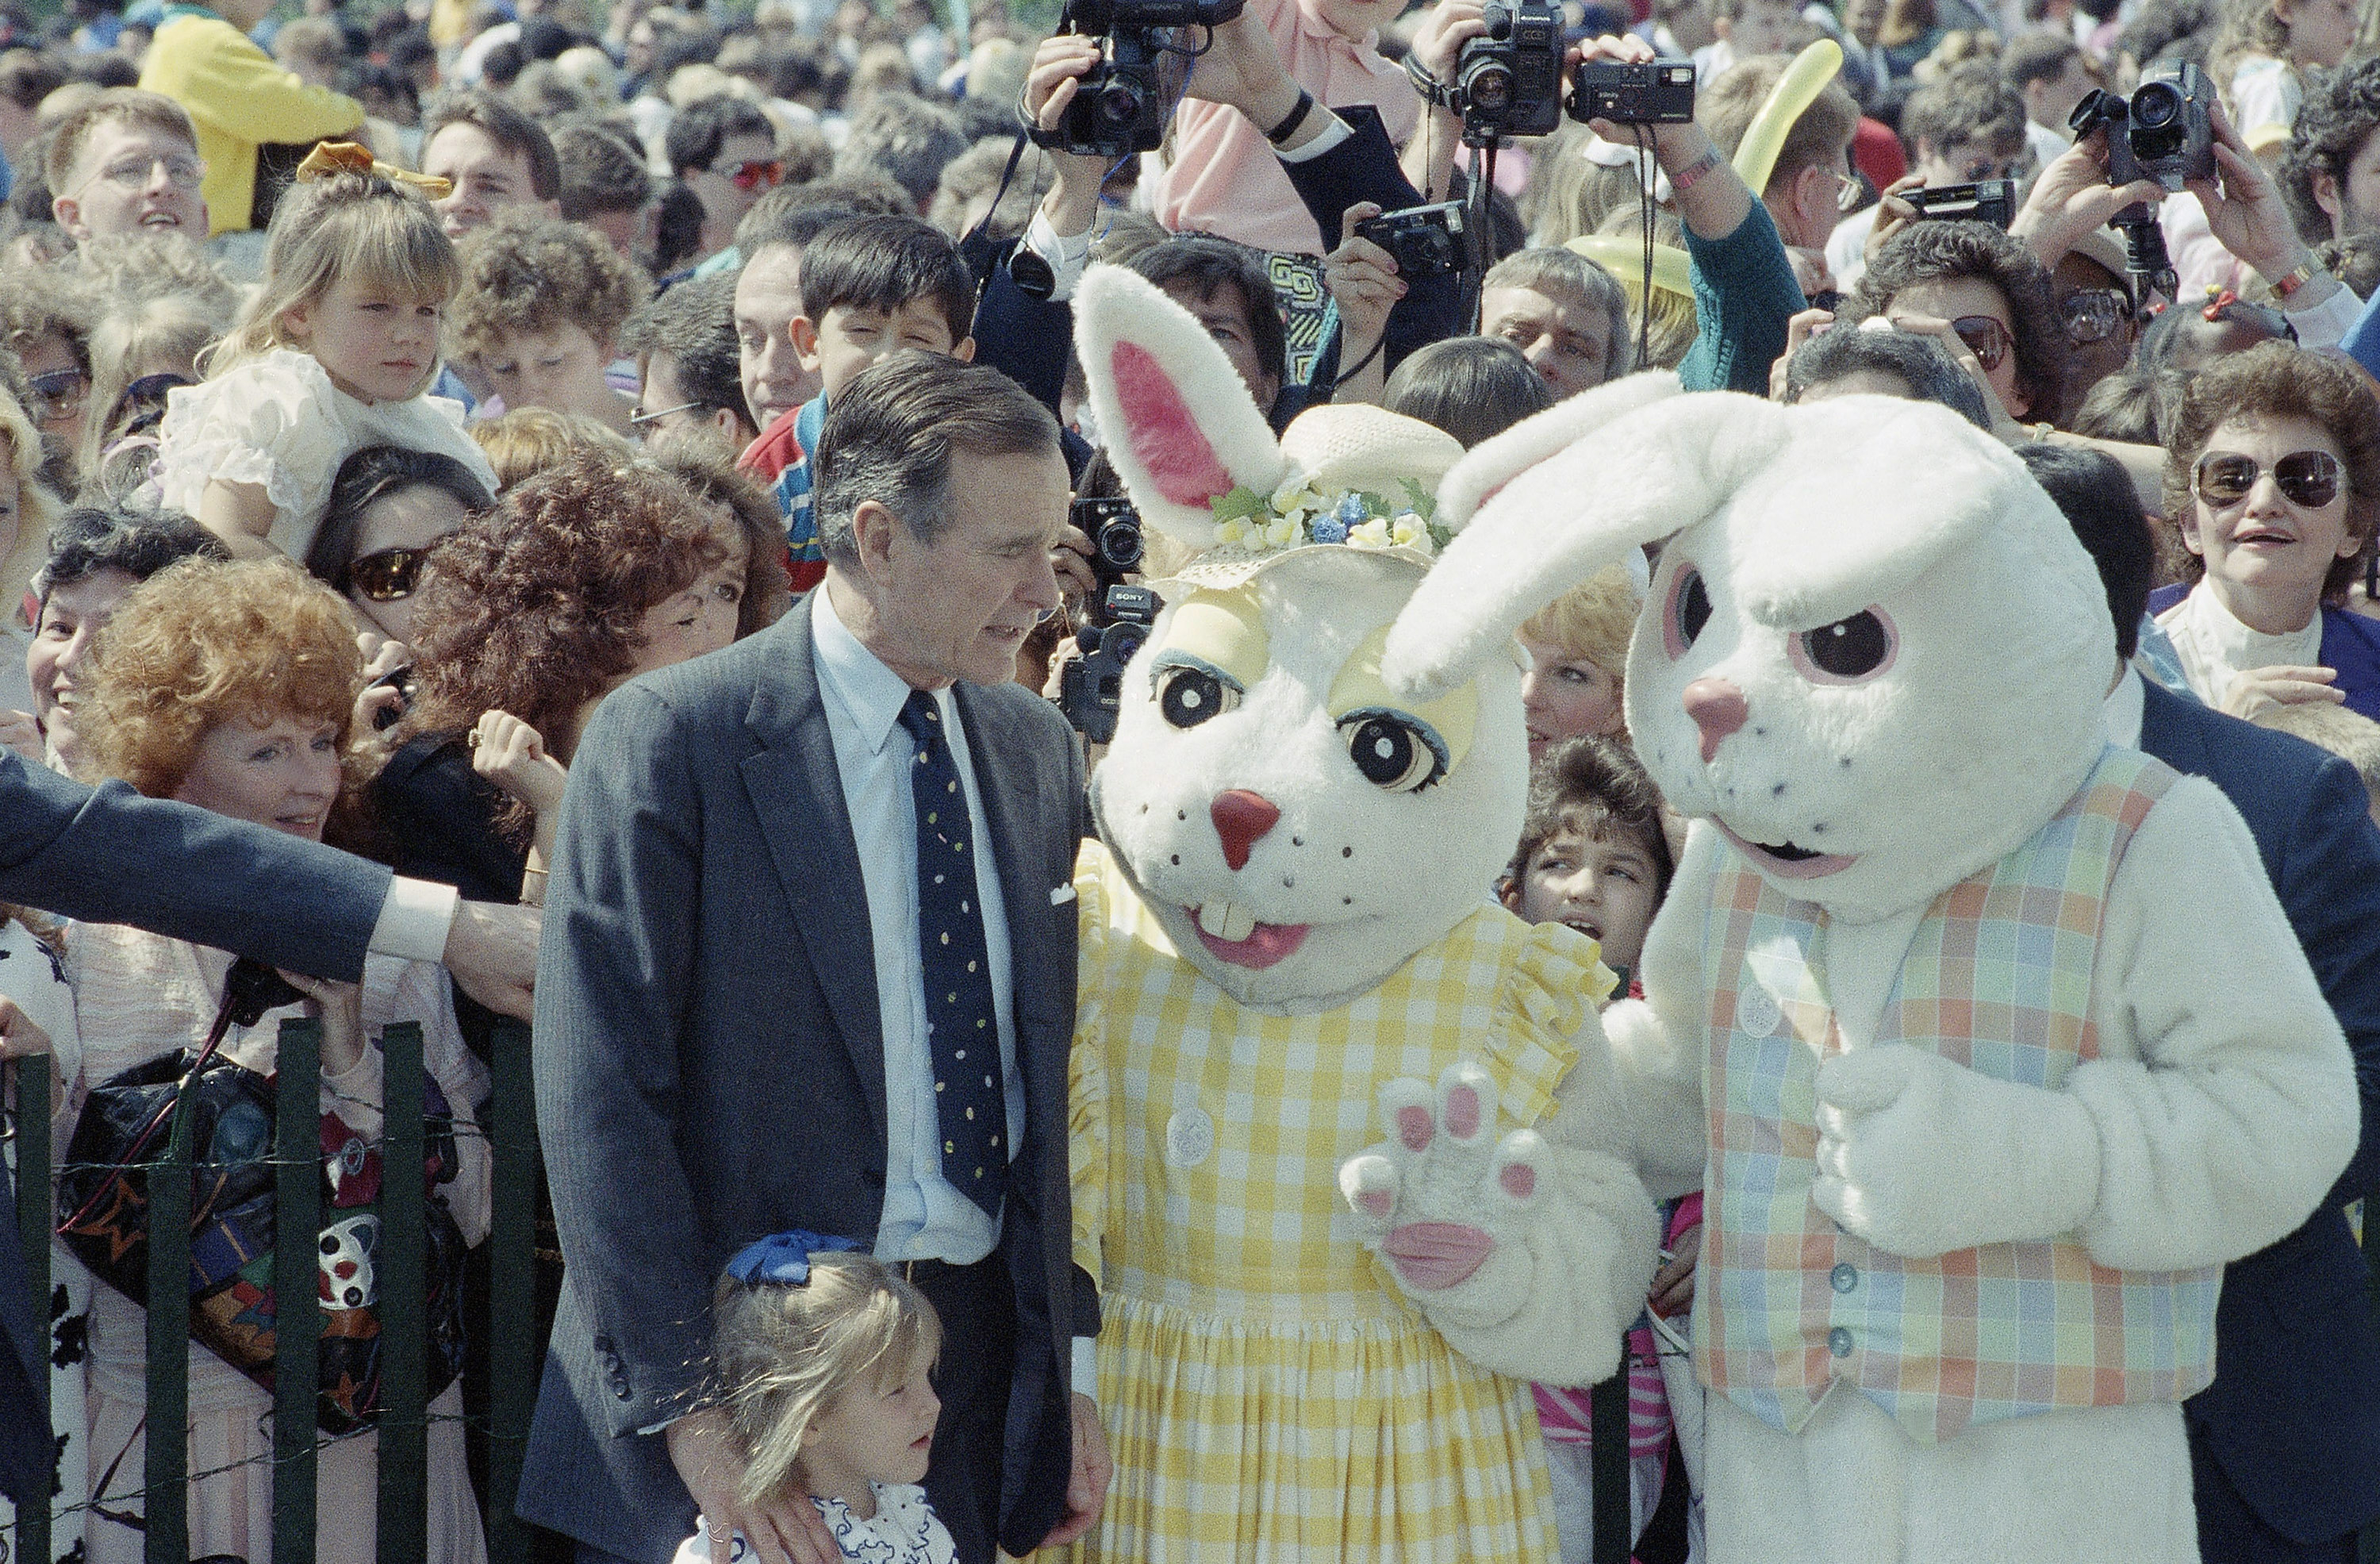 George H W Bush is seen with two giant rabbits, one of which looks menacing